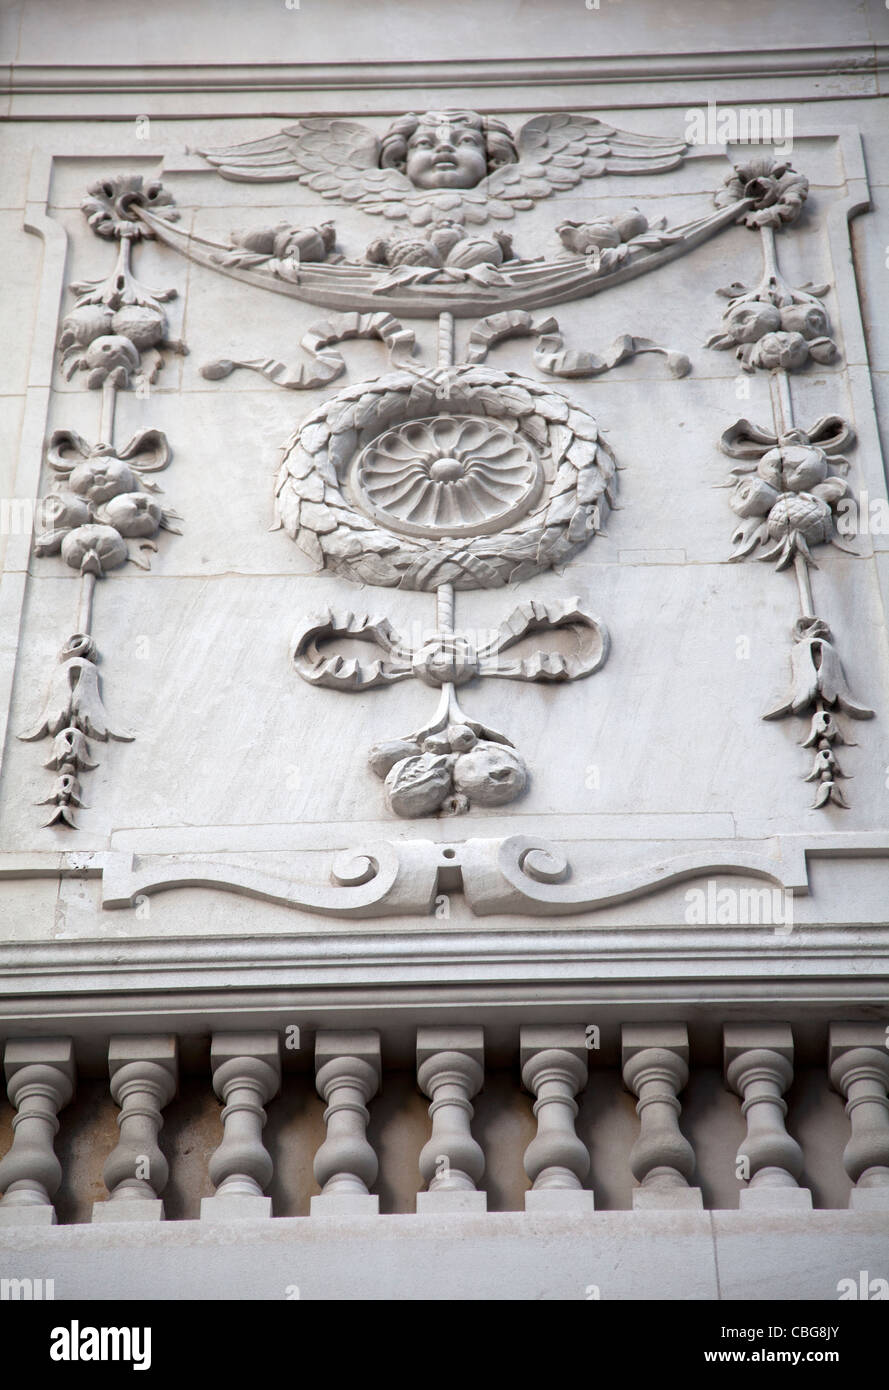 24 Portland Place - Relief Carving on stone wall - London UK Stock Photo